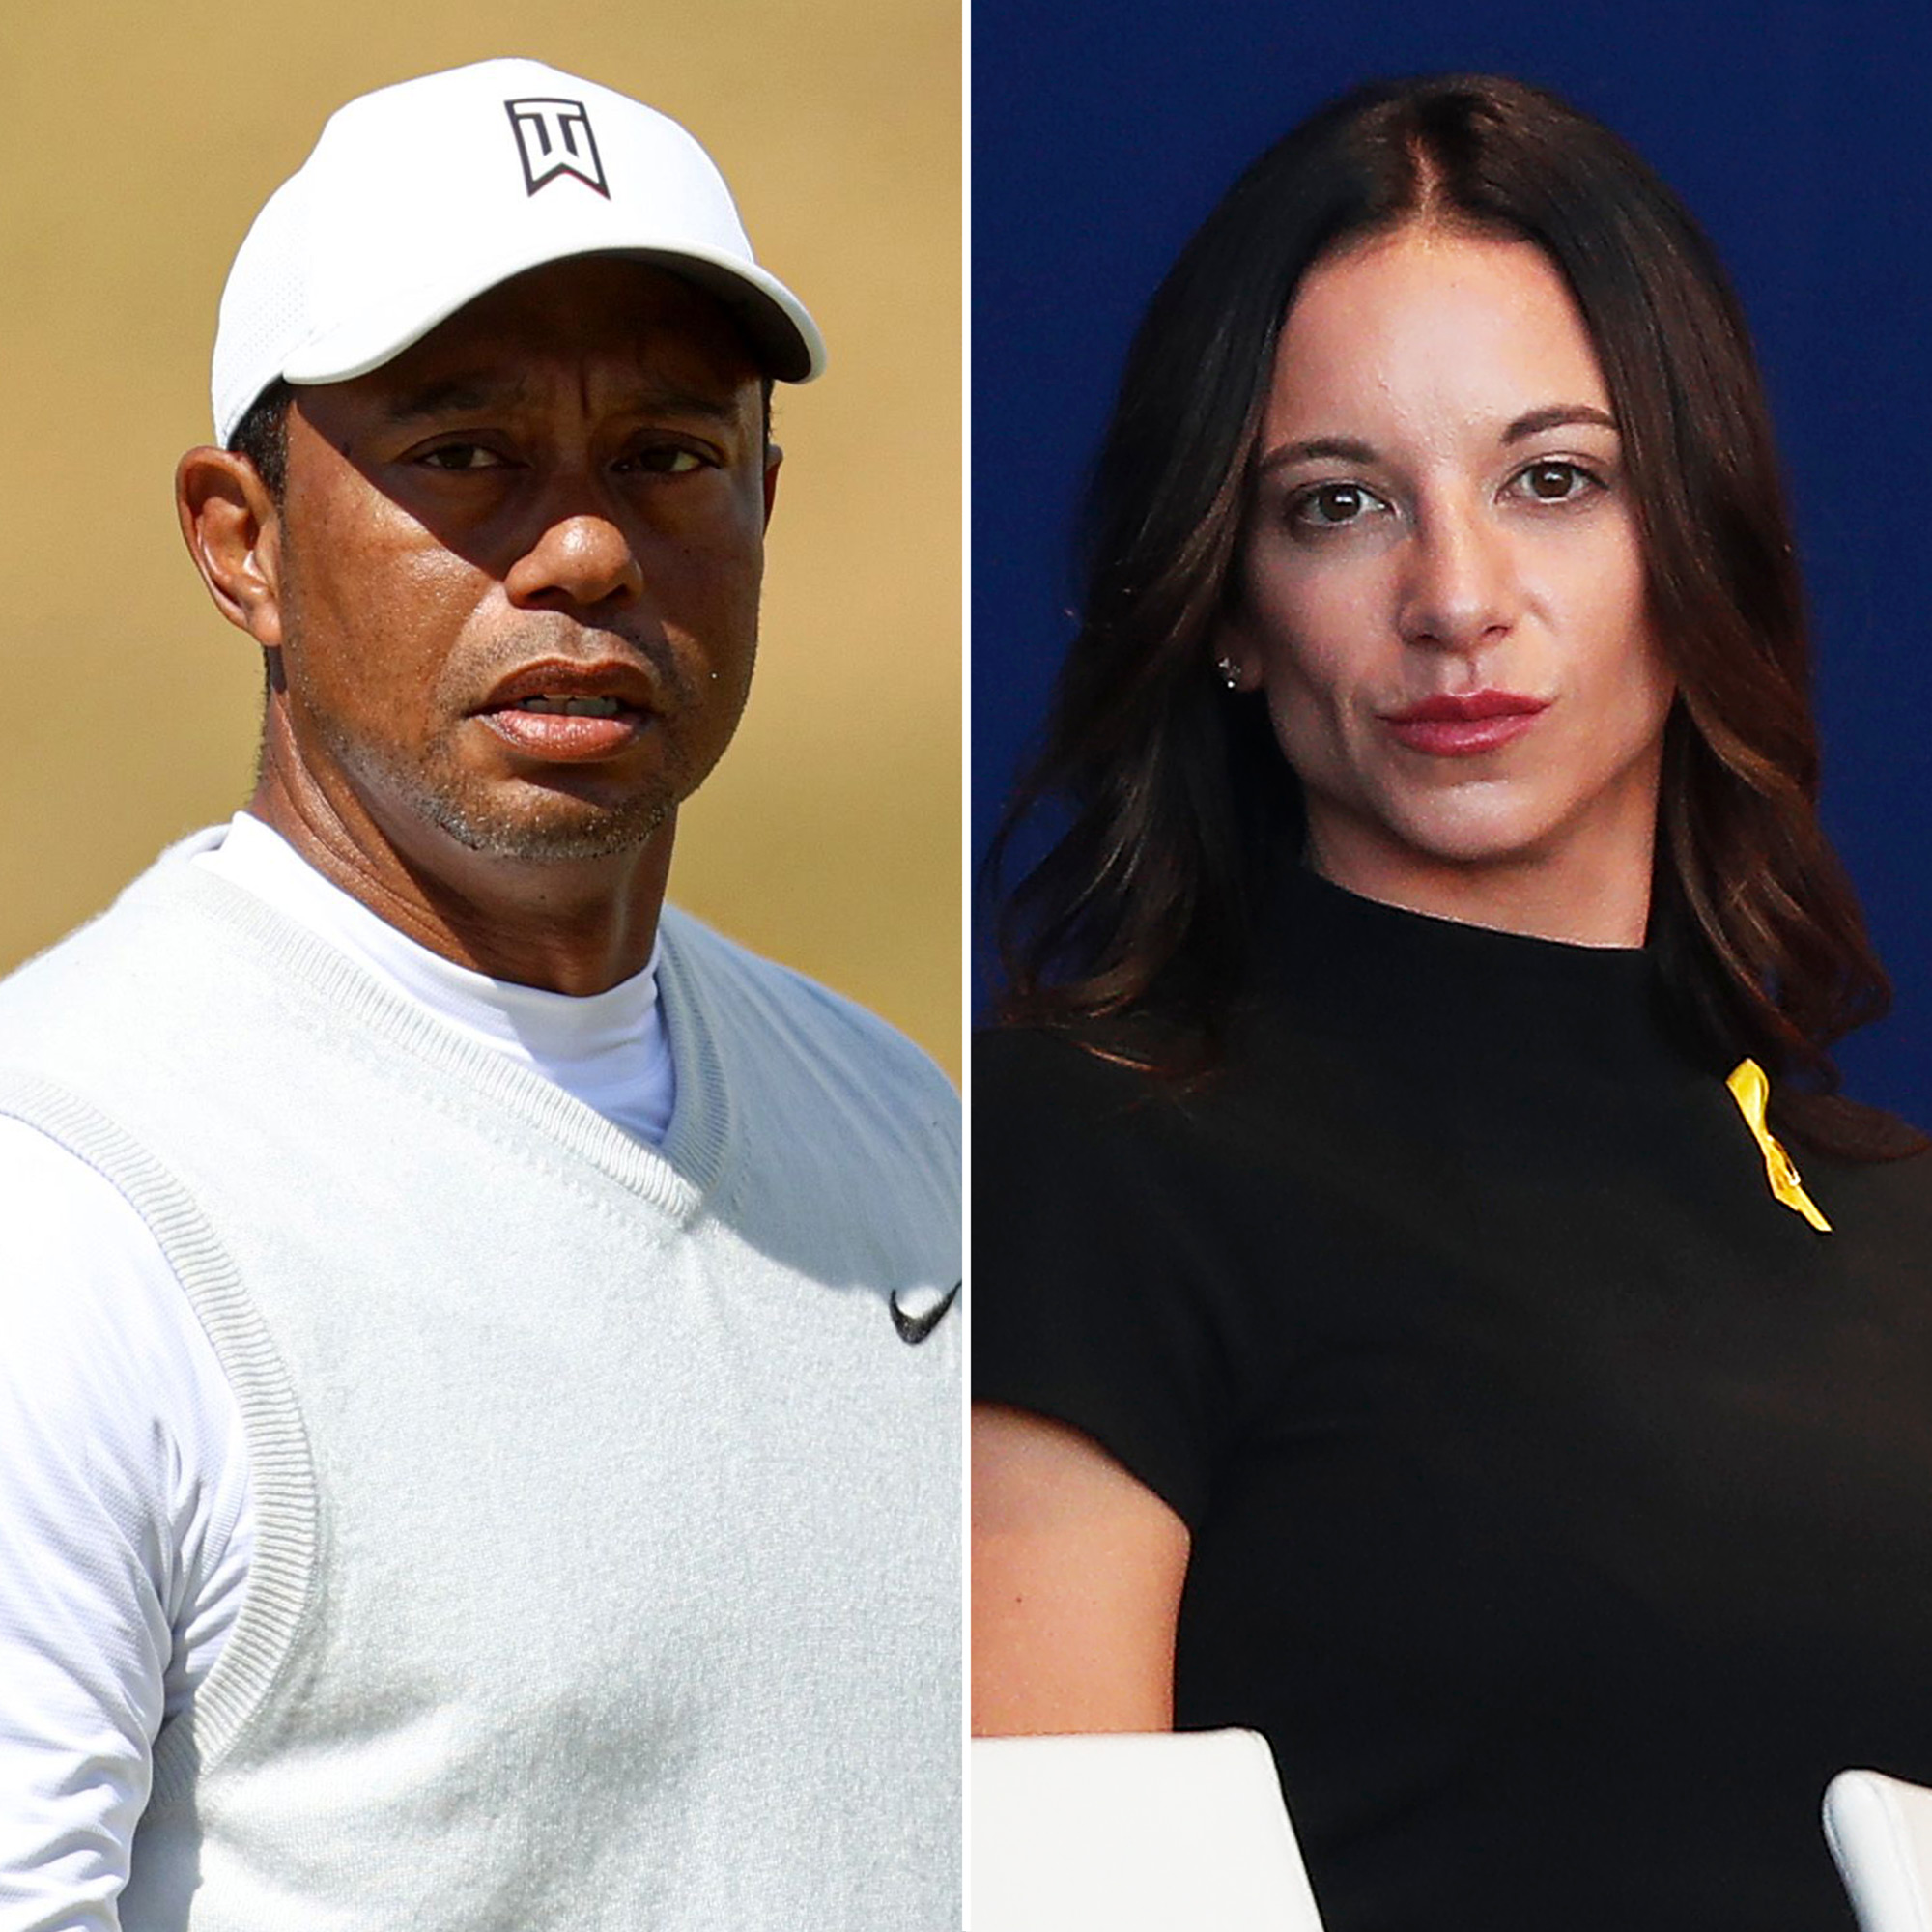 Tiger Woods and Erica Hermans Messy Split What to Know image